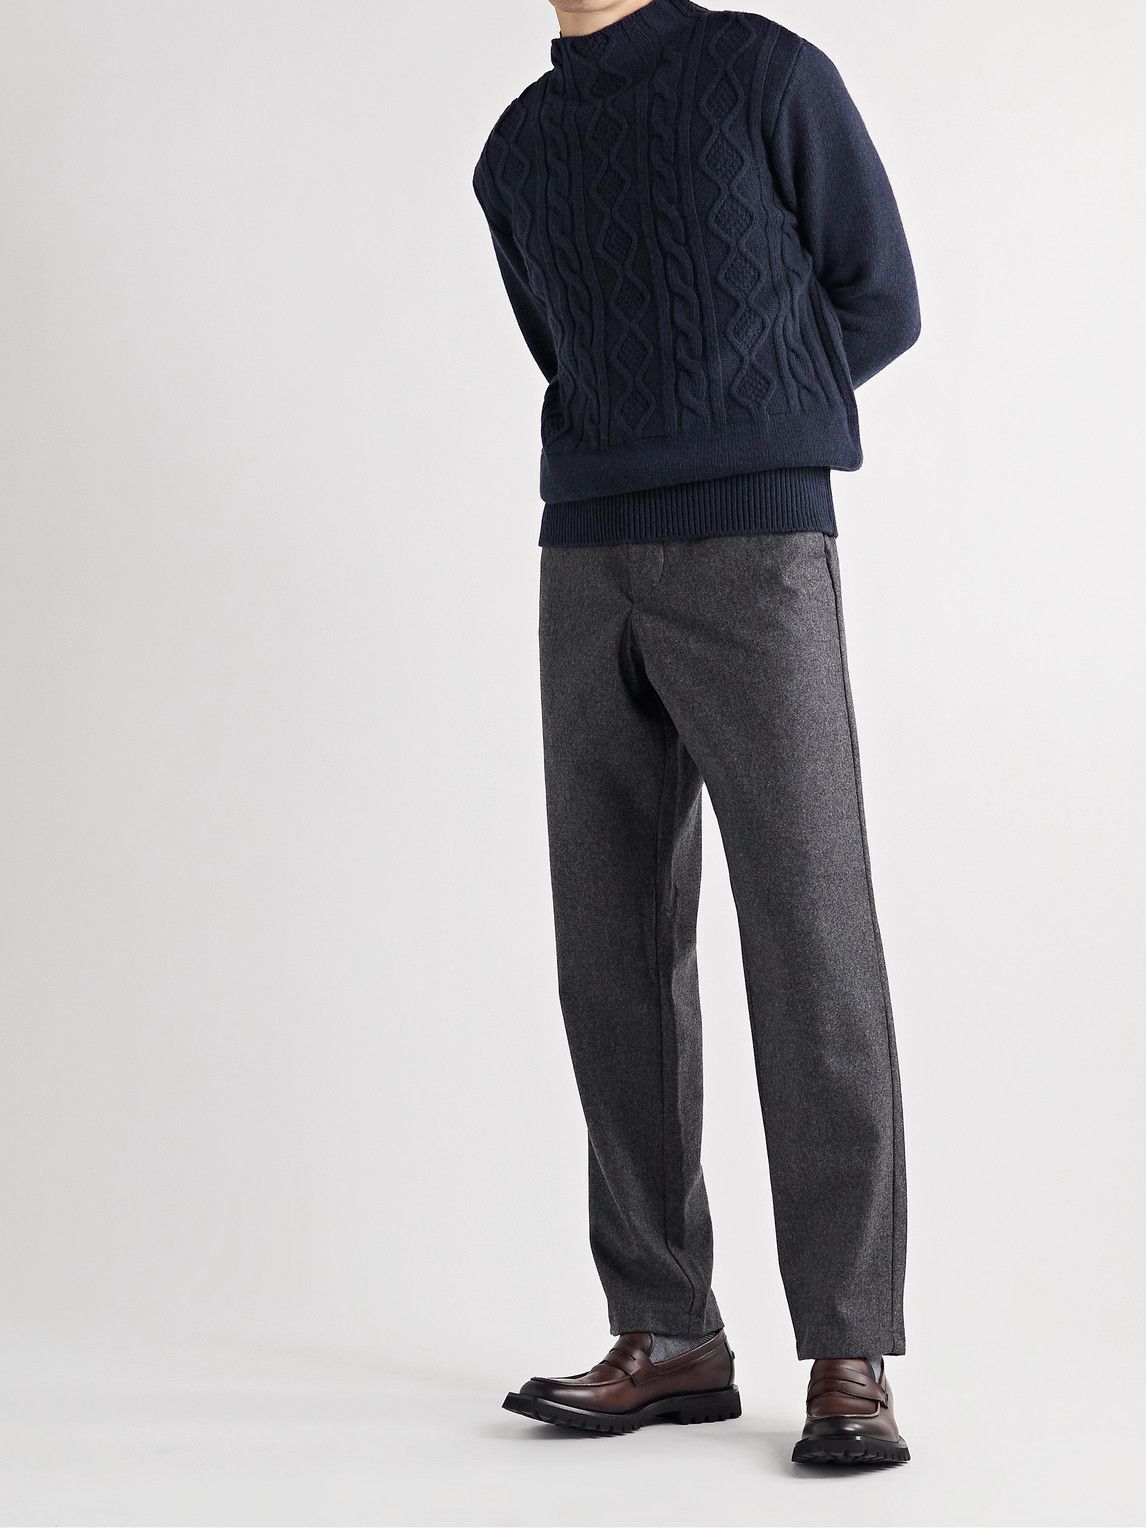 Oliver Spencer - Henfield Cable-Knit Wool Mock-Neck Sweater - Blue